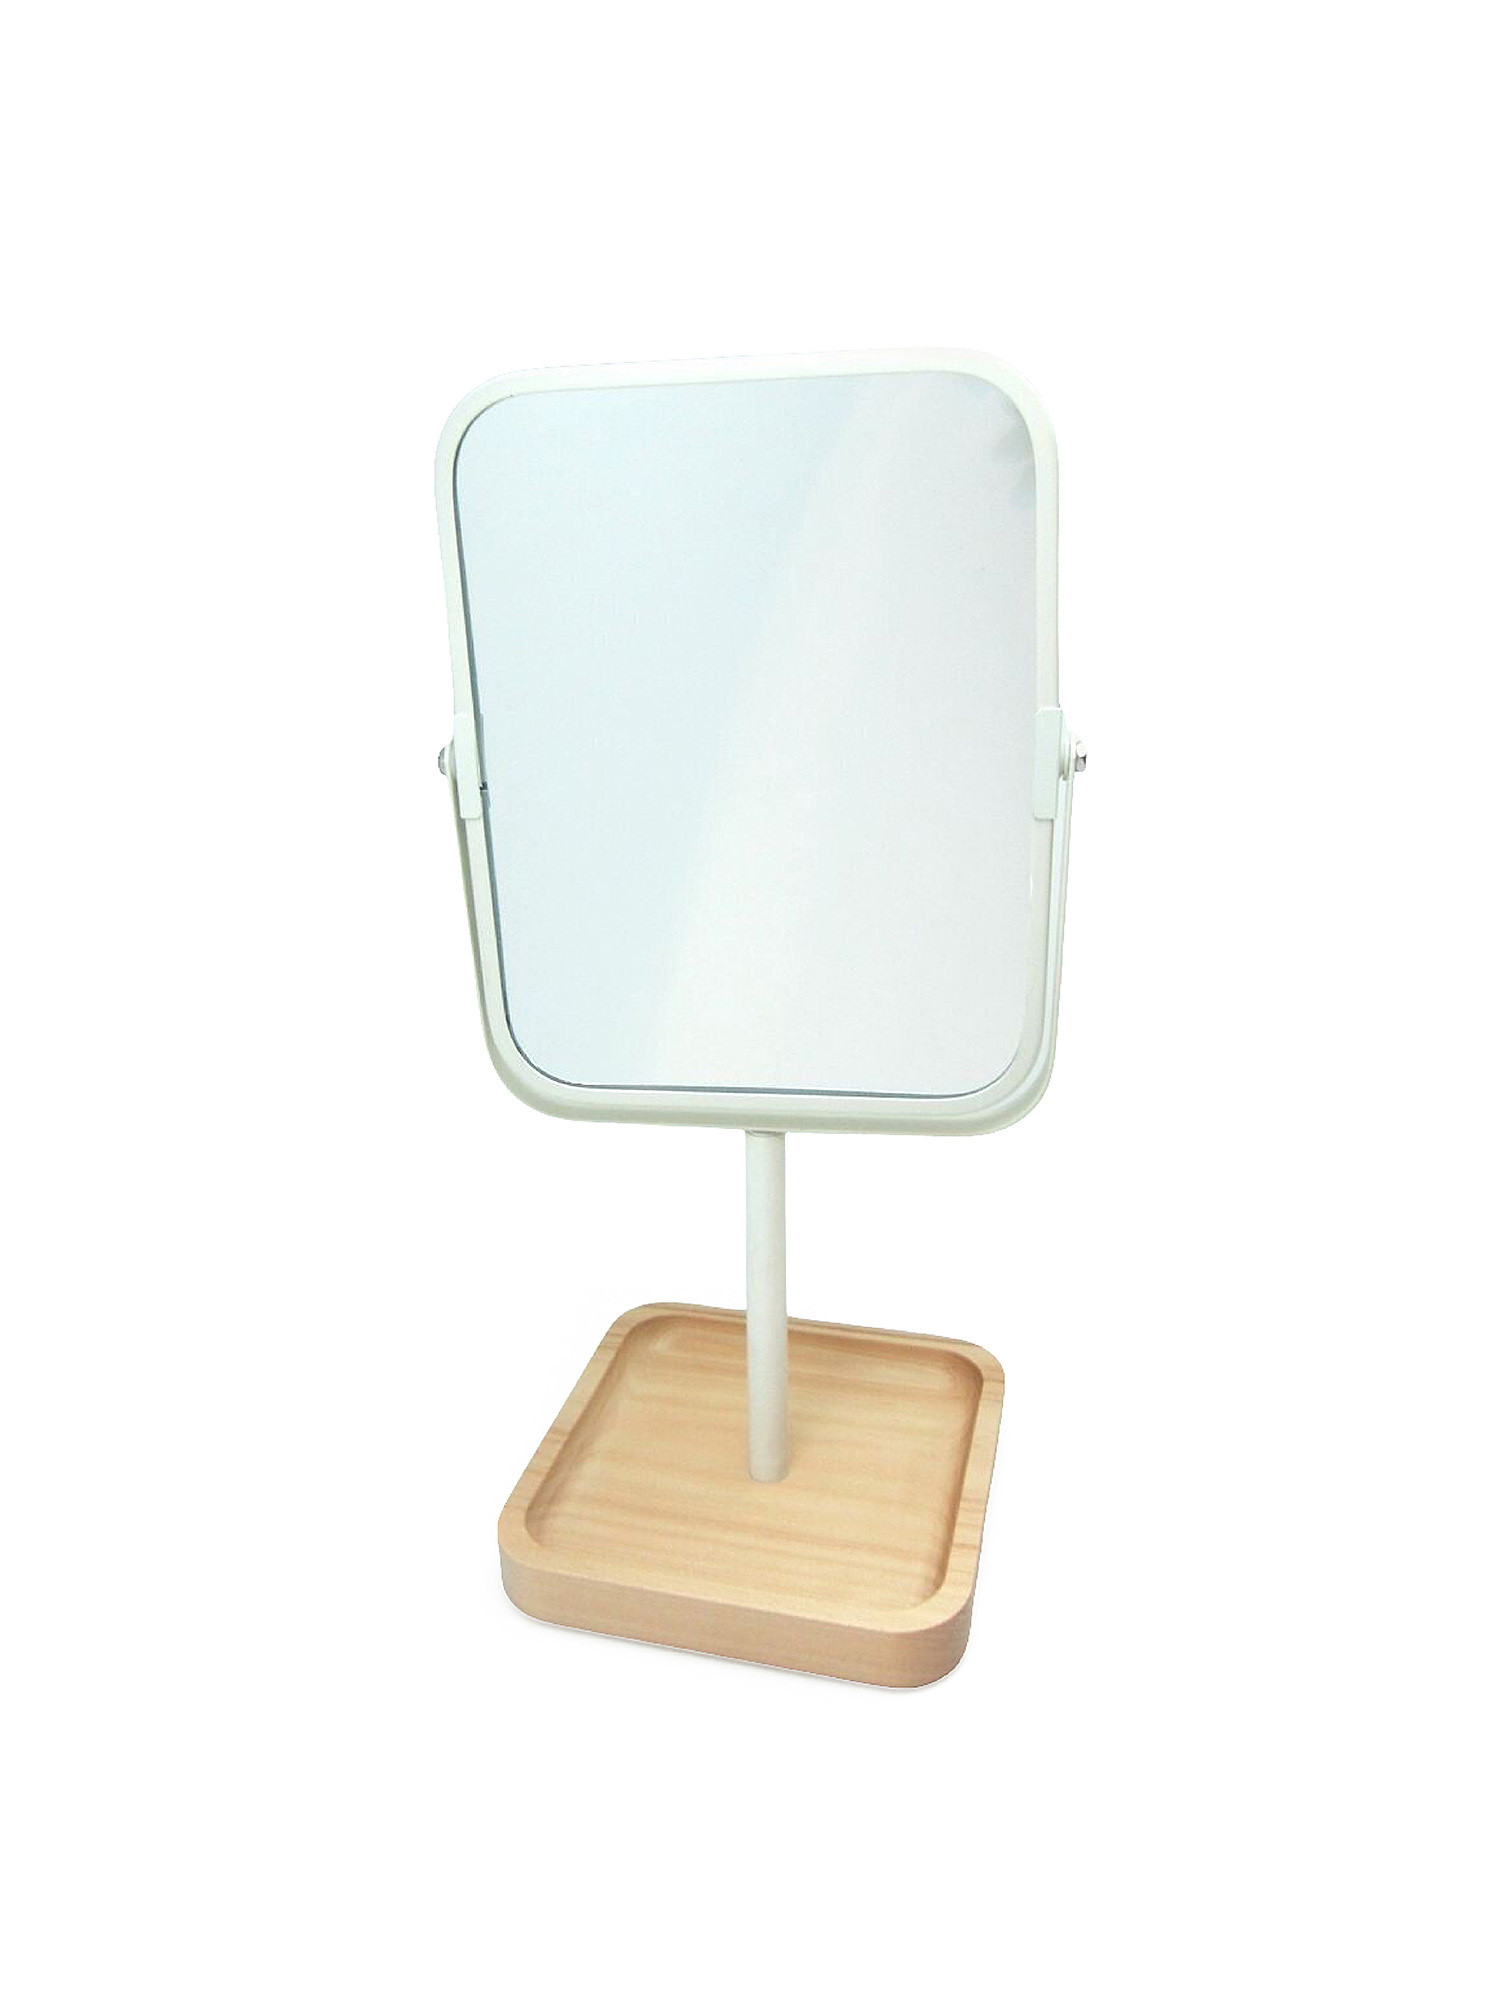 Mirror with wooden base, White / Beige, large image number 0